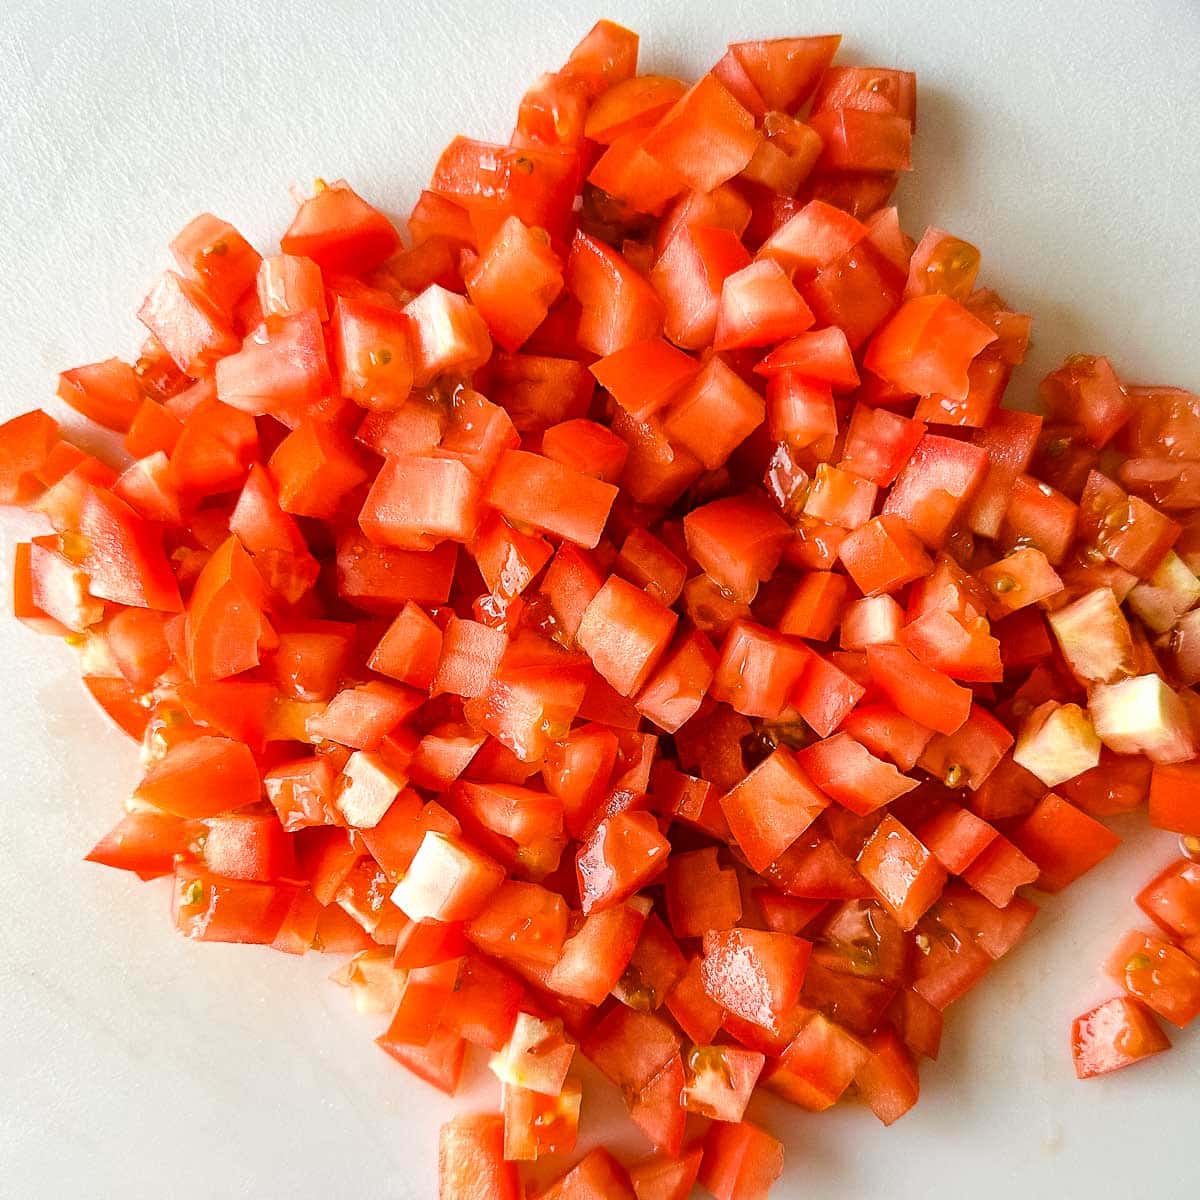 Chopped roma tomatoes on a white cutting board.